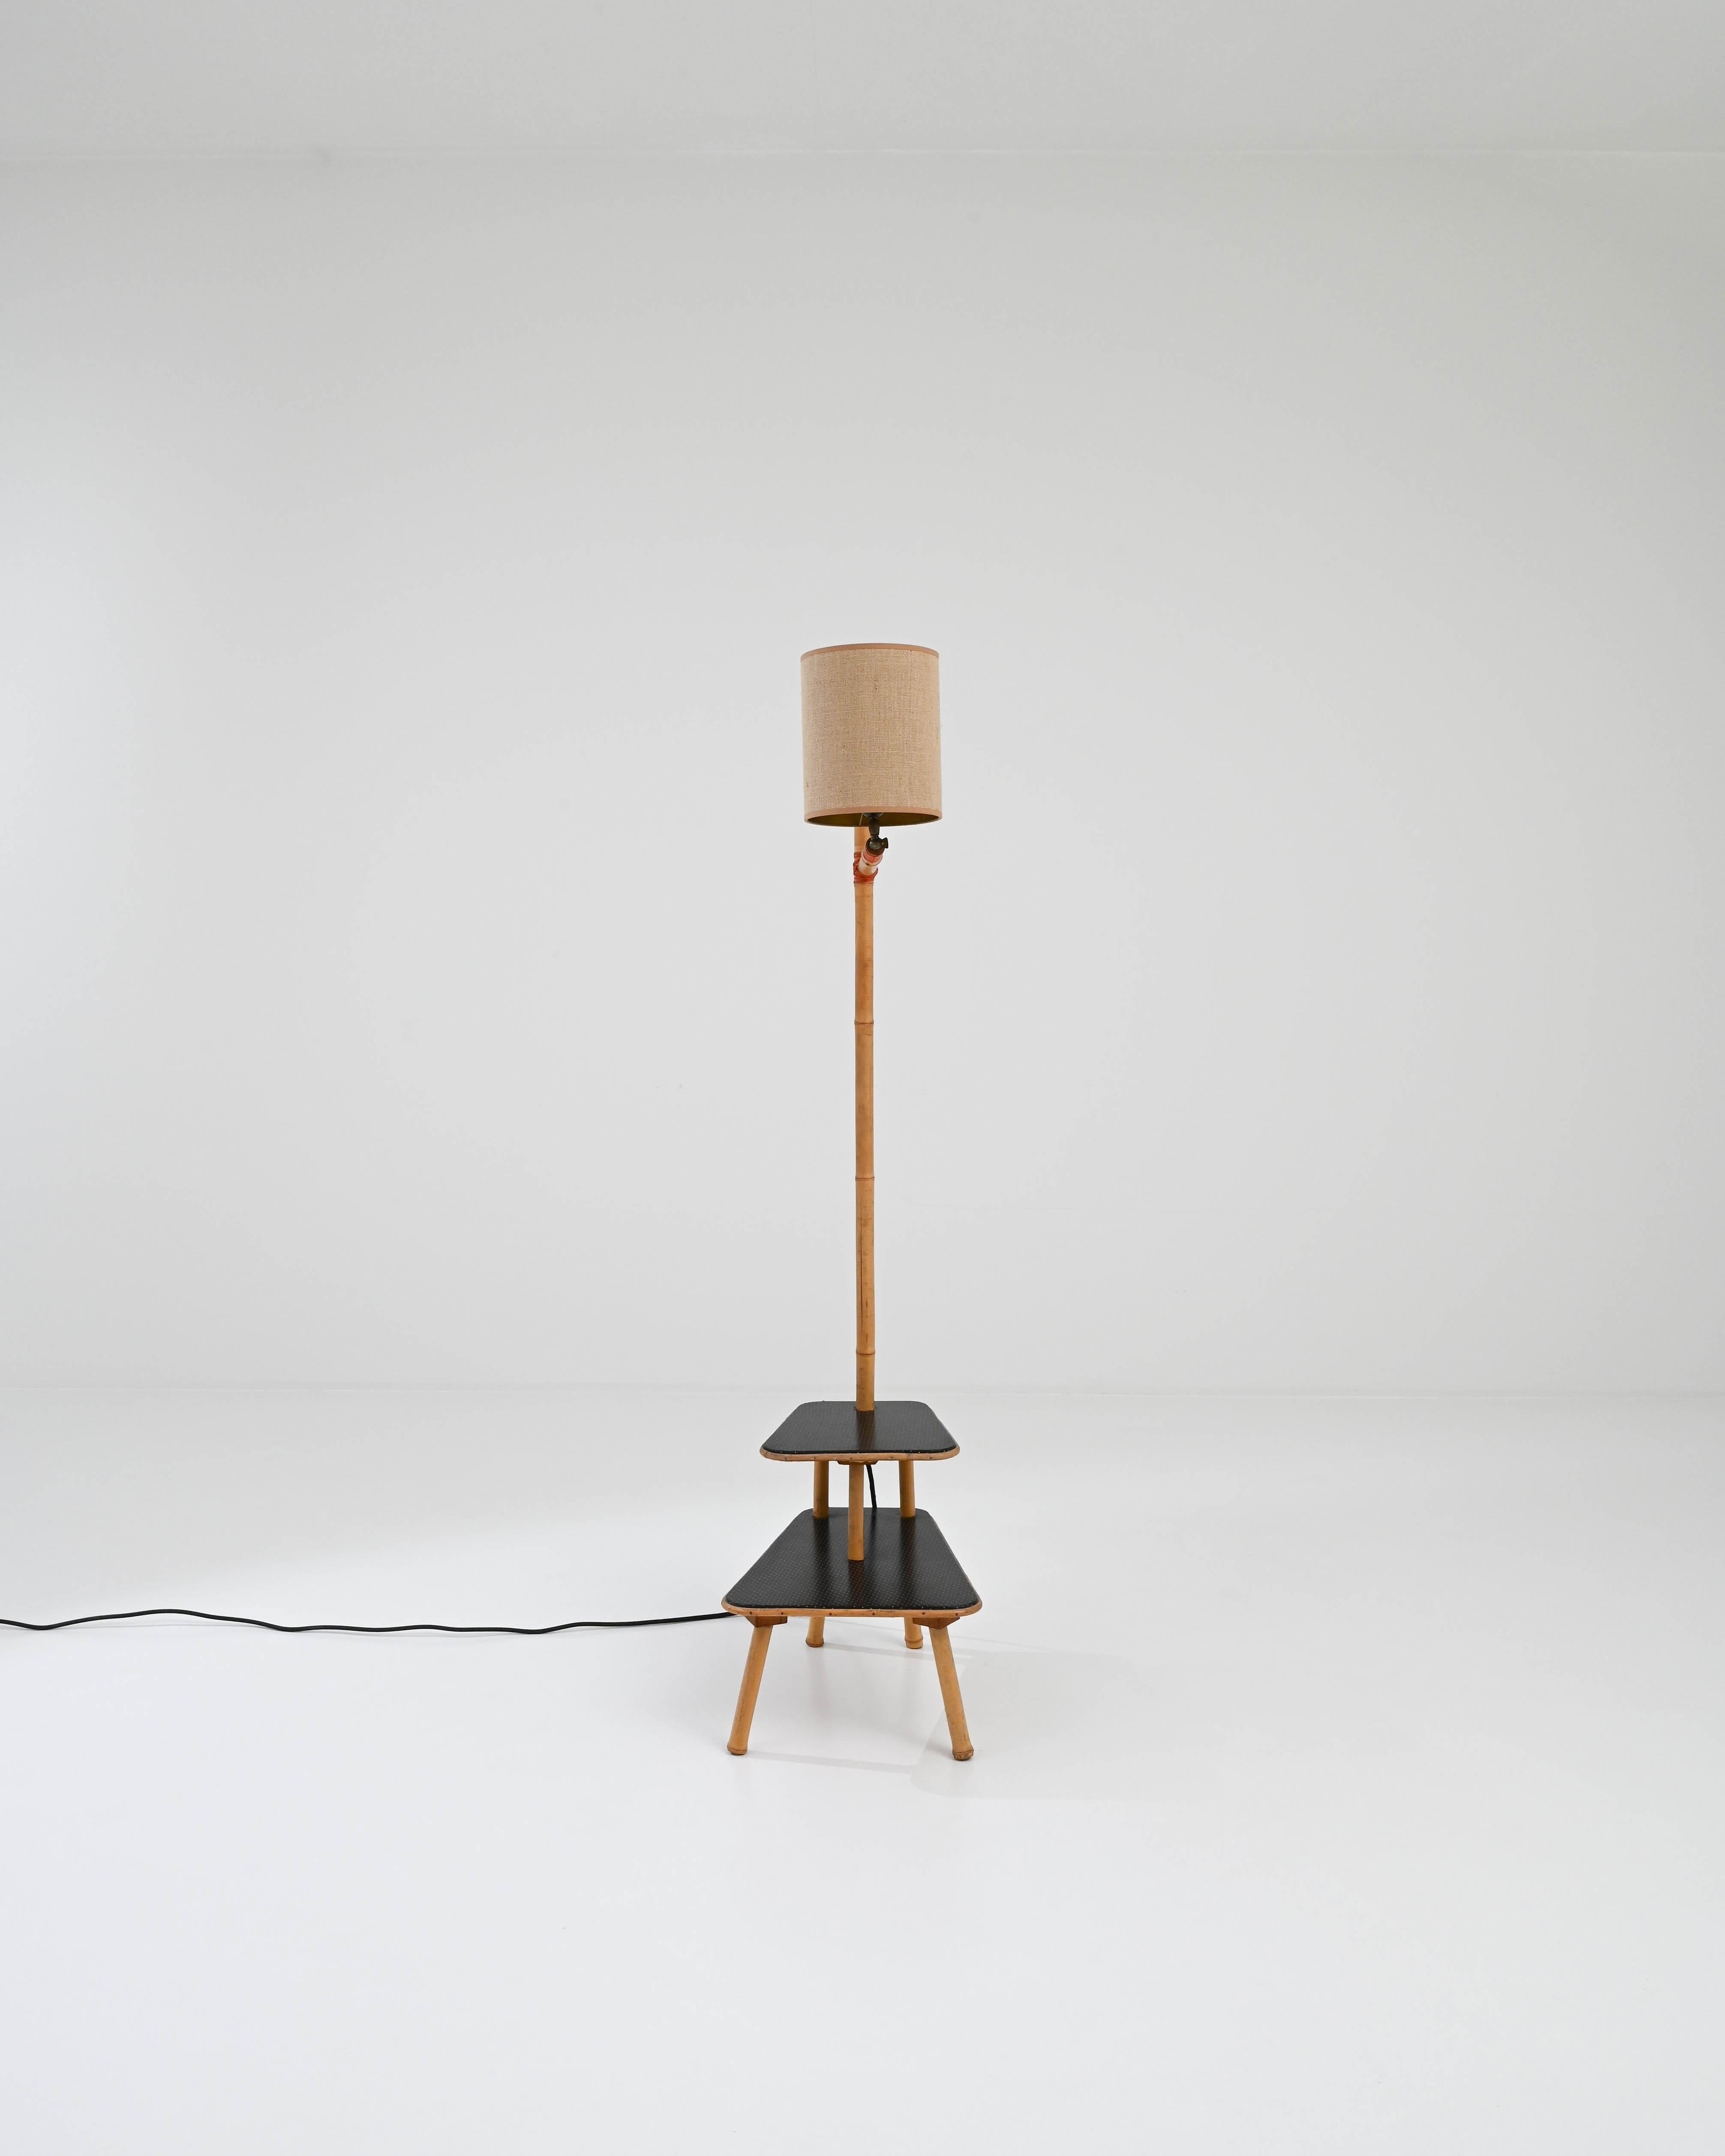 A bamboo floor lamp that makes a perfect companion in any reading break taking space. Versatile enough to be a bedside table, end table, little book stand or simply a freestanding lamp, its modernist simplicity descends from the tradition of making